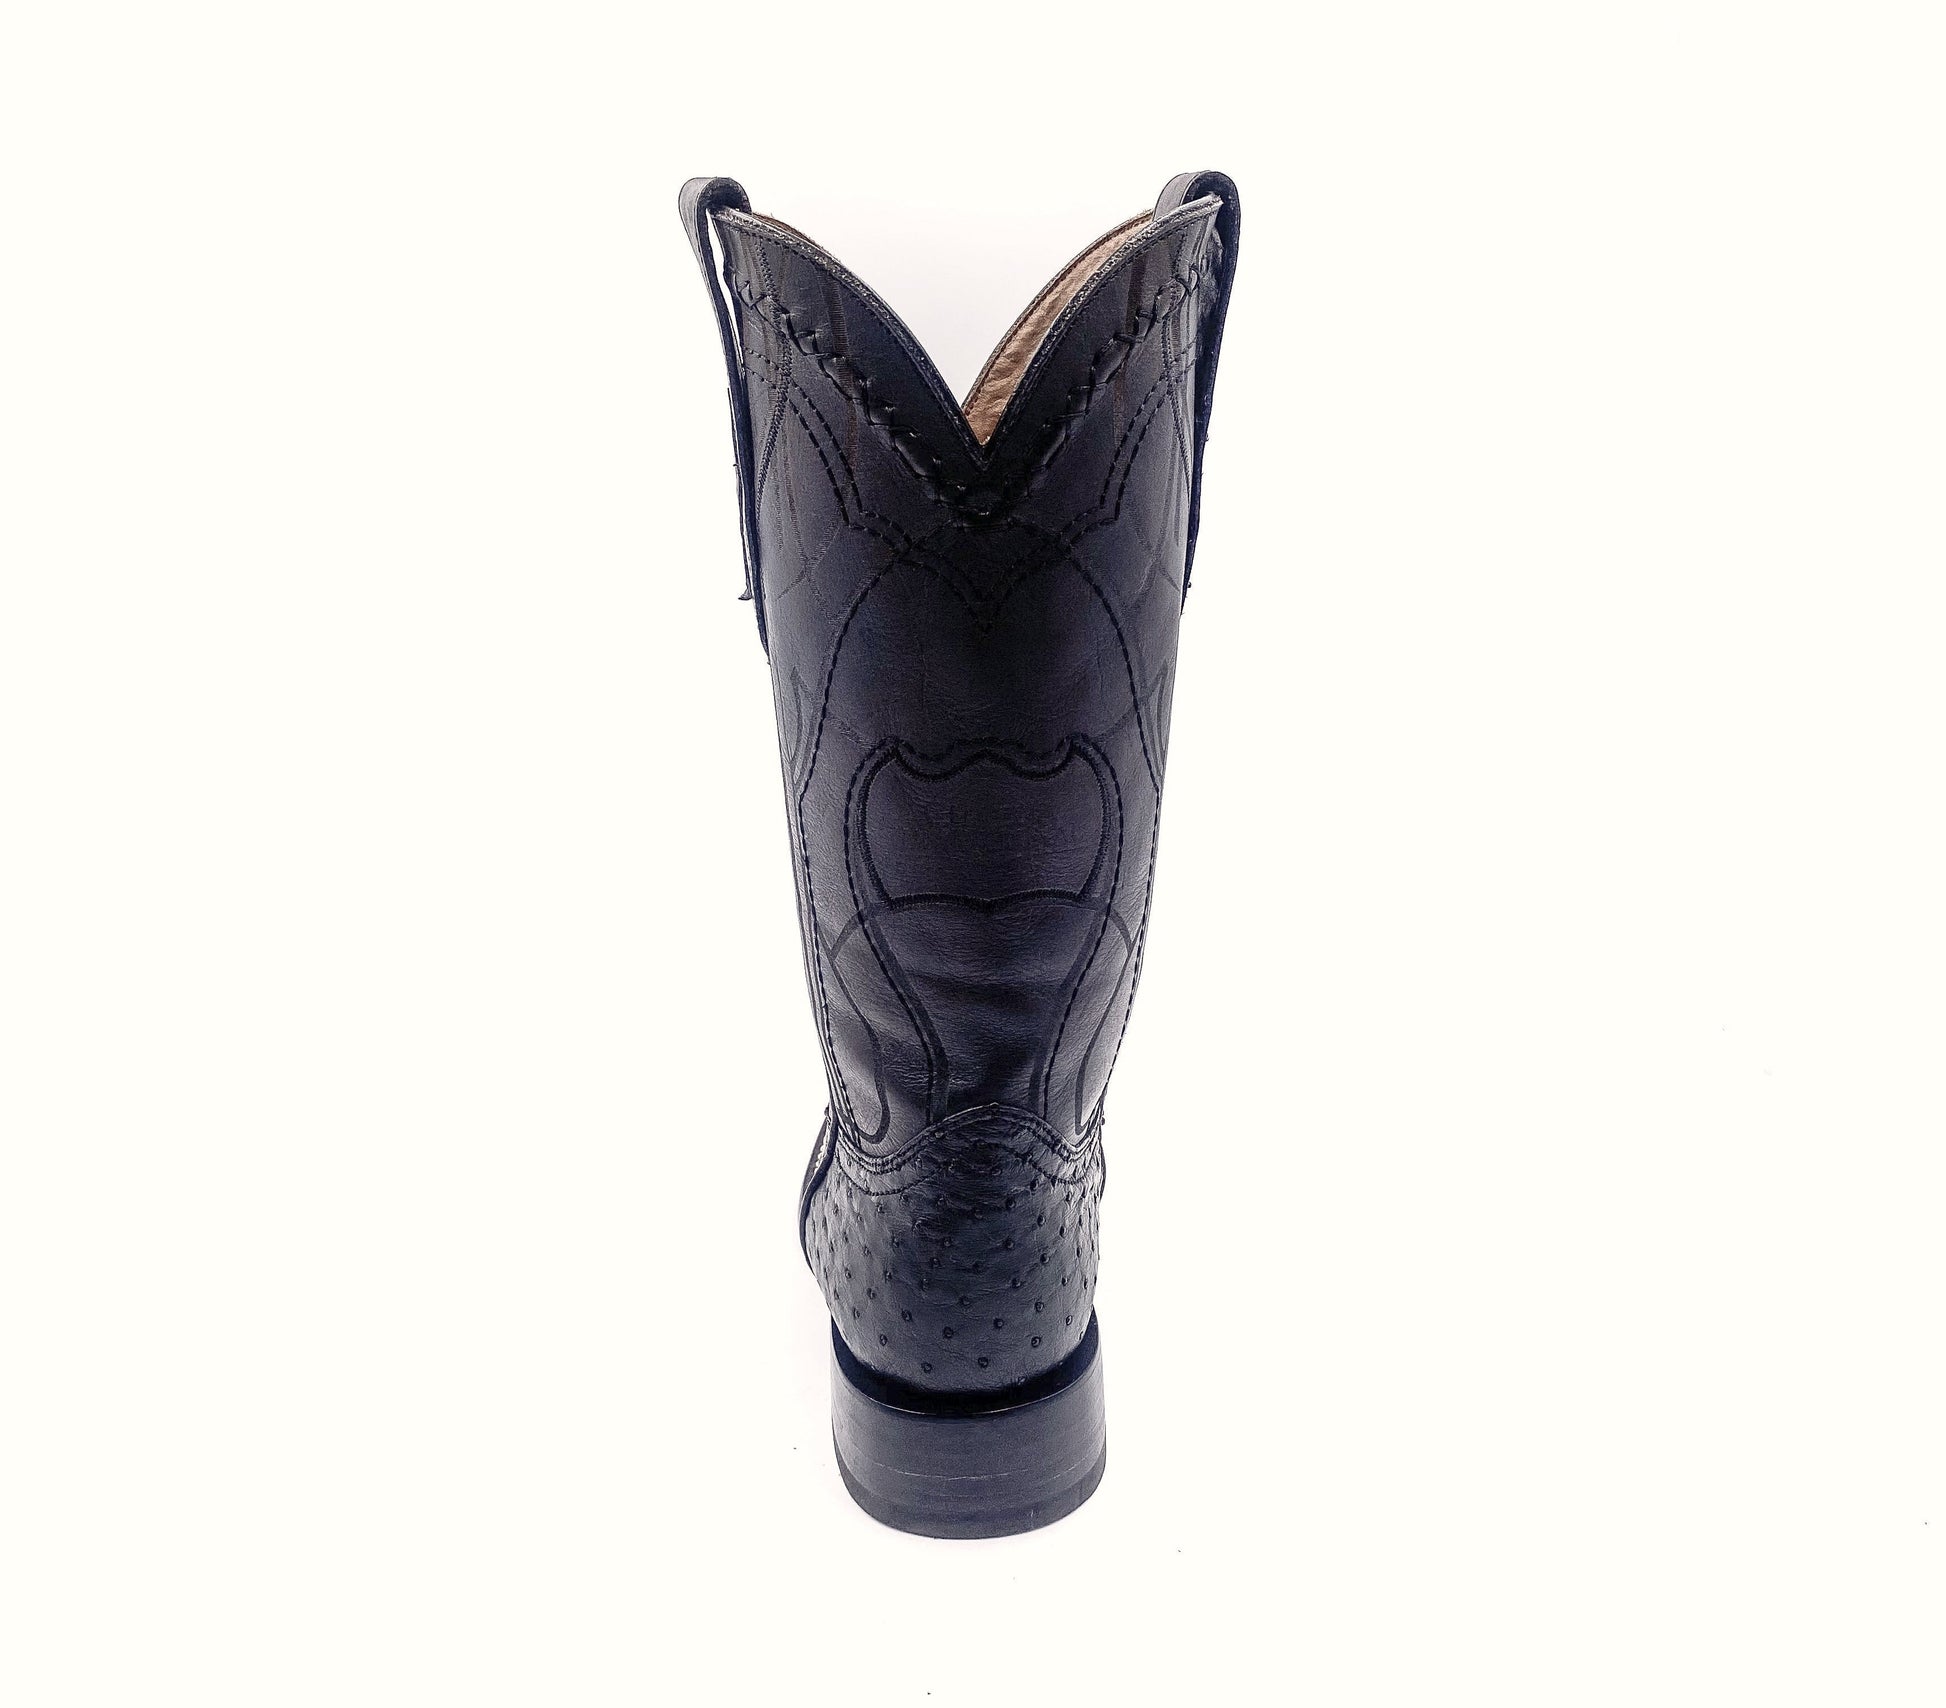 3Z1OA1 - Cuadra black classic cowboy rodeo ostrich leather boots for men-Kuet.us